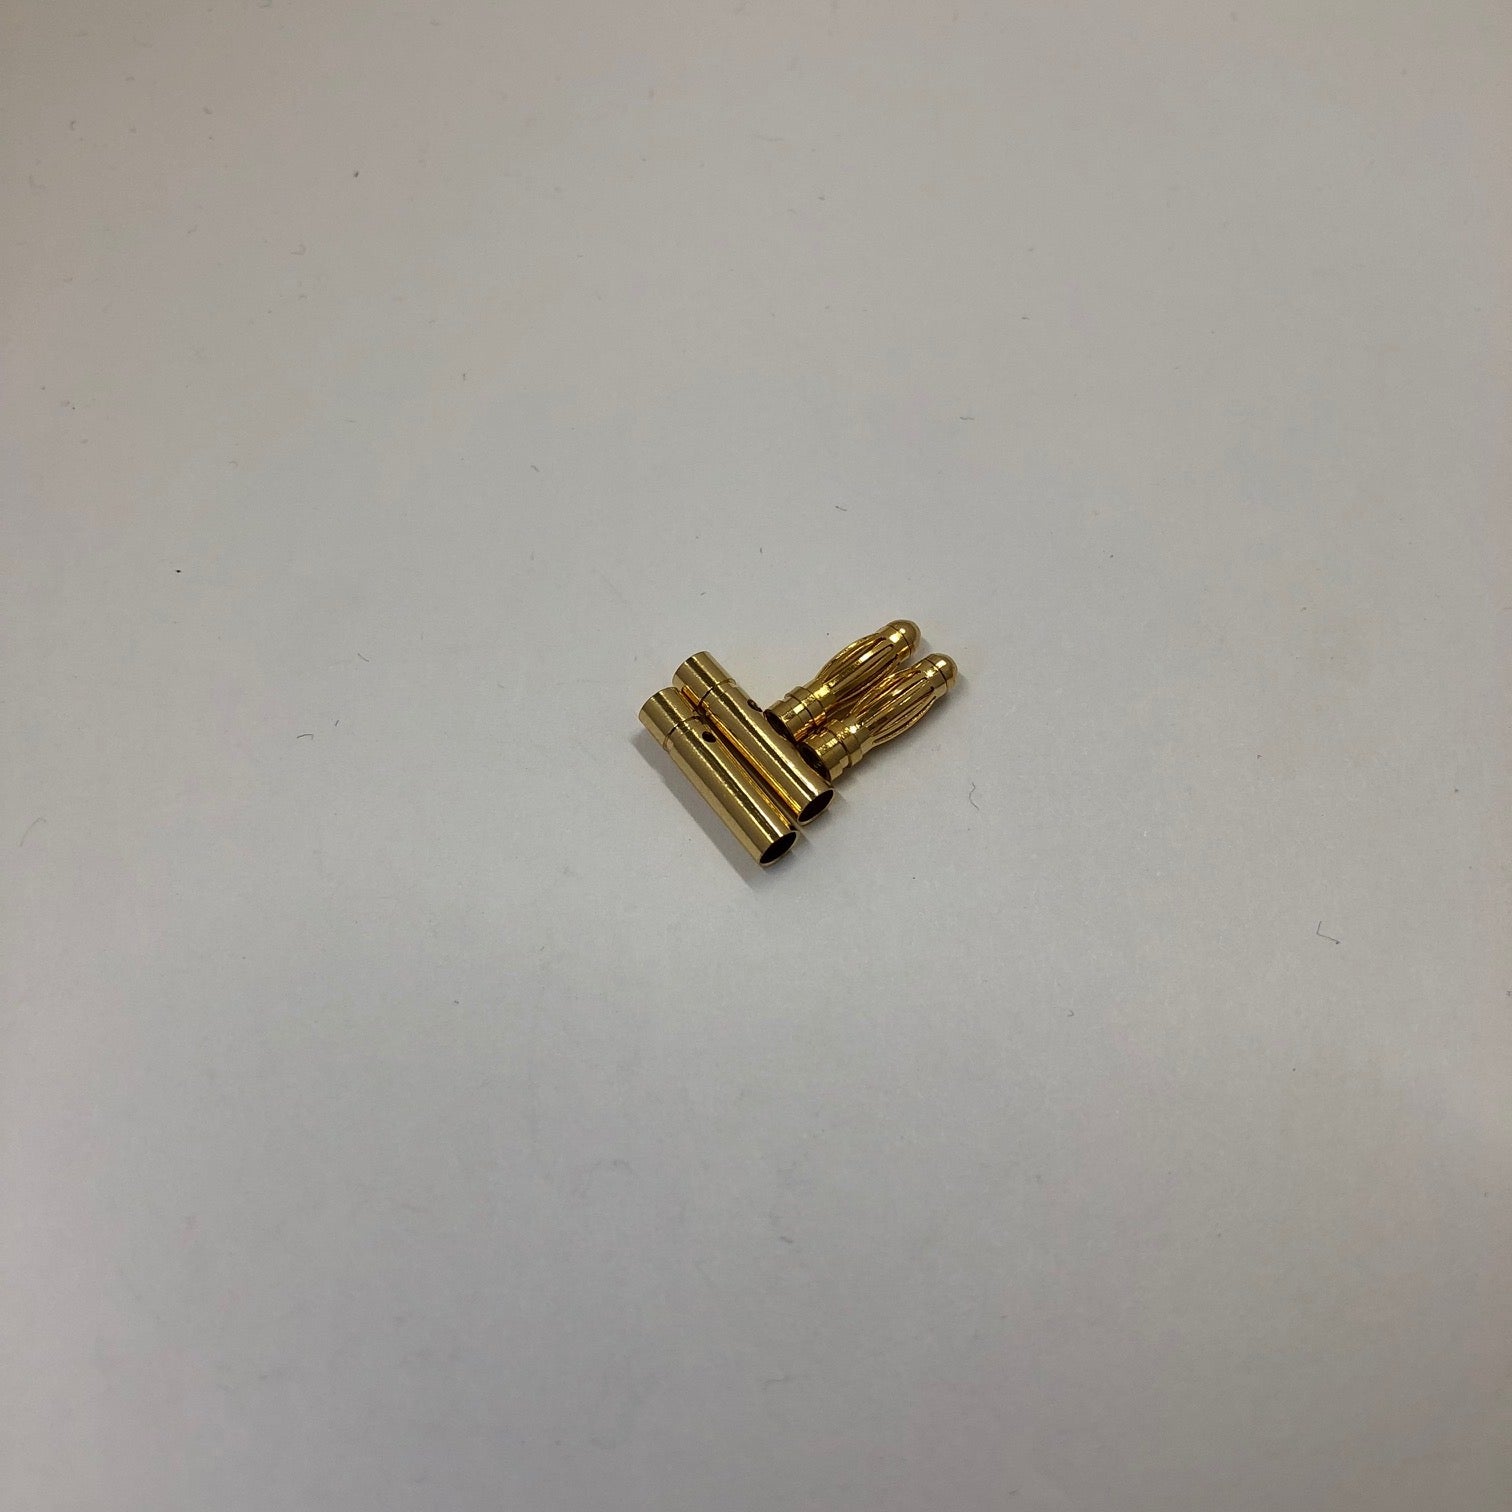 3mm Gold Bullet Connector Set - 2 Pairs